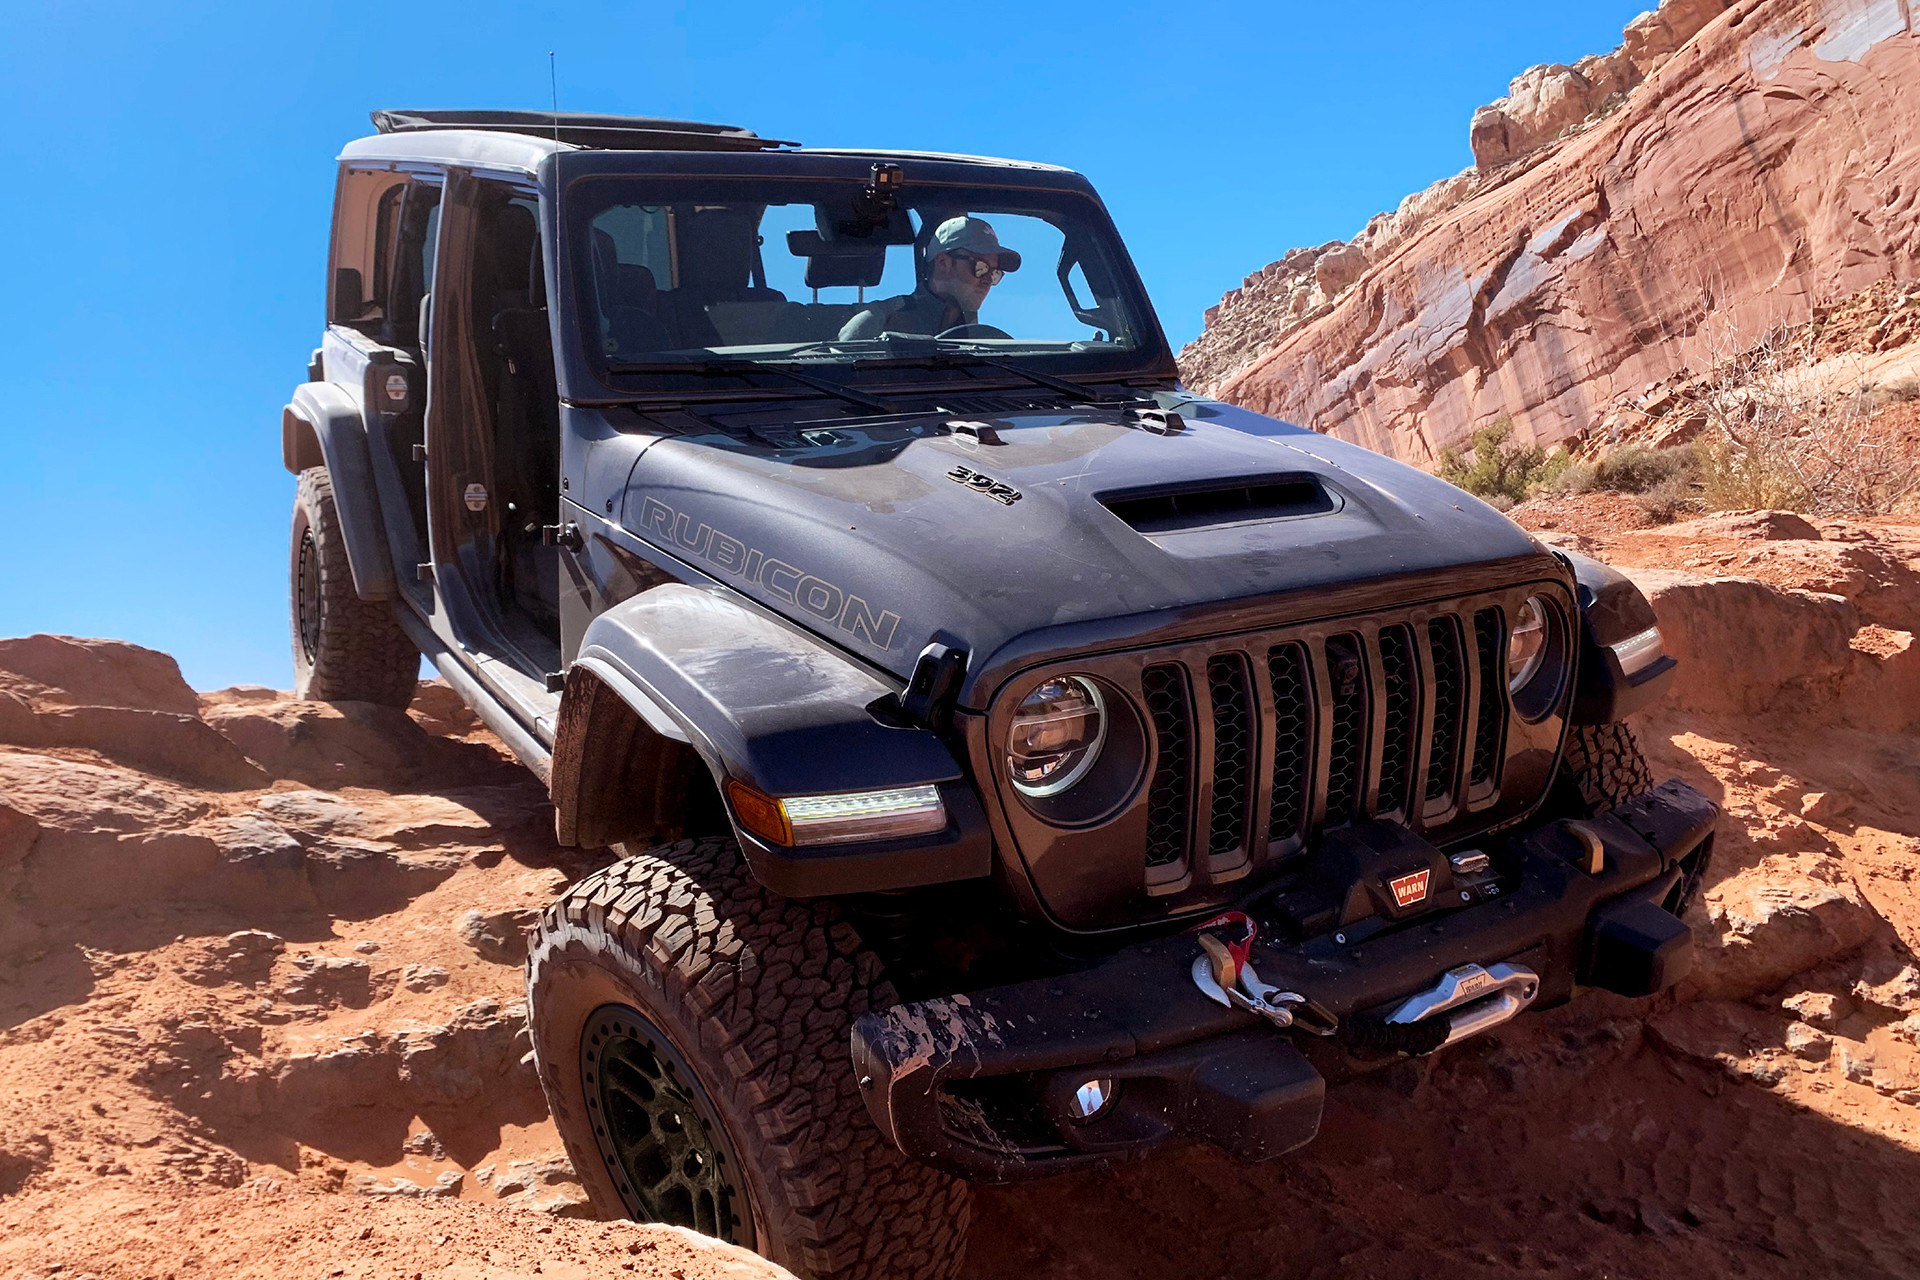 Blue 2022 Jeep Wrangler parked downhill on a rocky terrain.